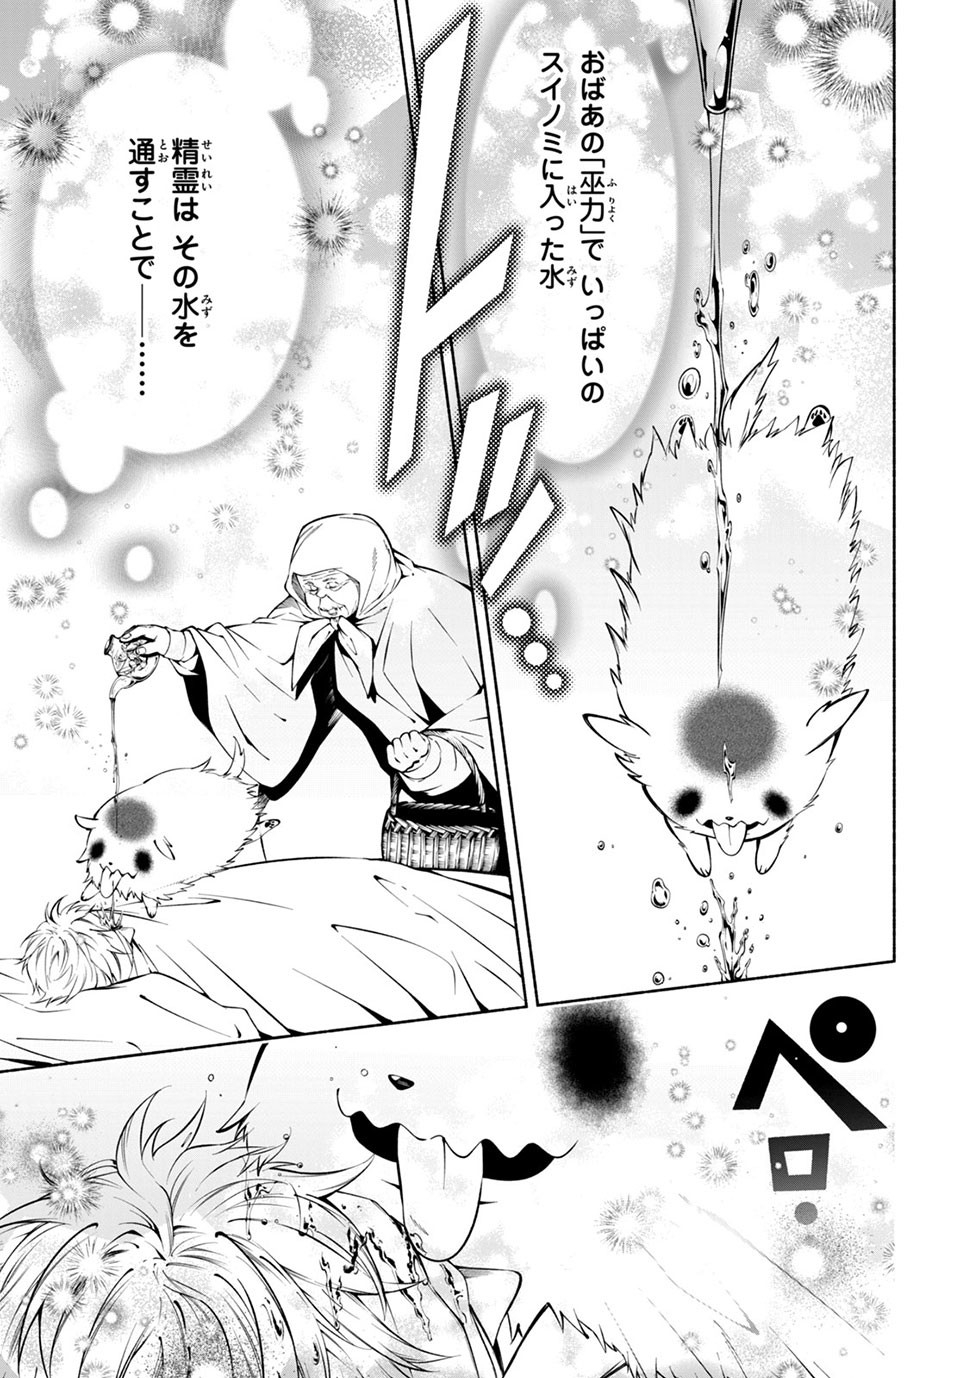 Shaman King: and a garden 第6.2話 - Page 5